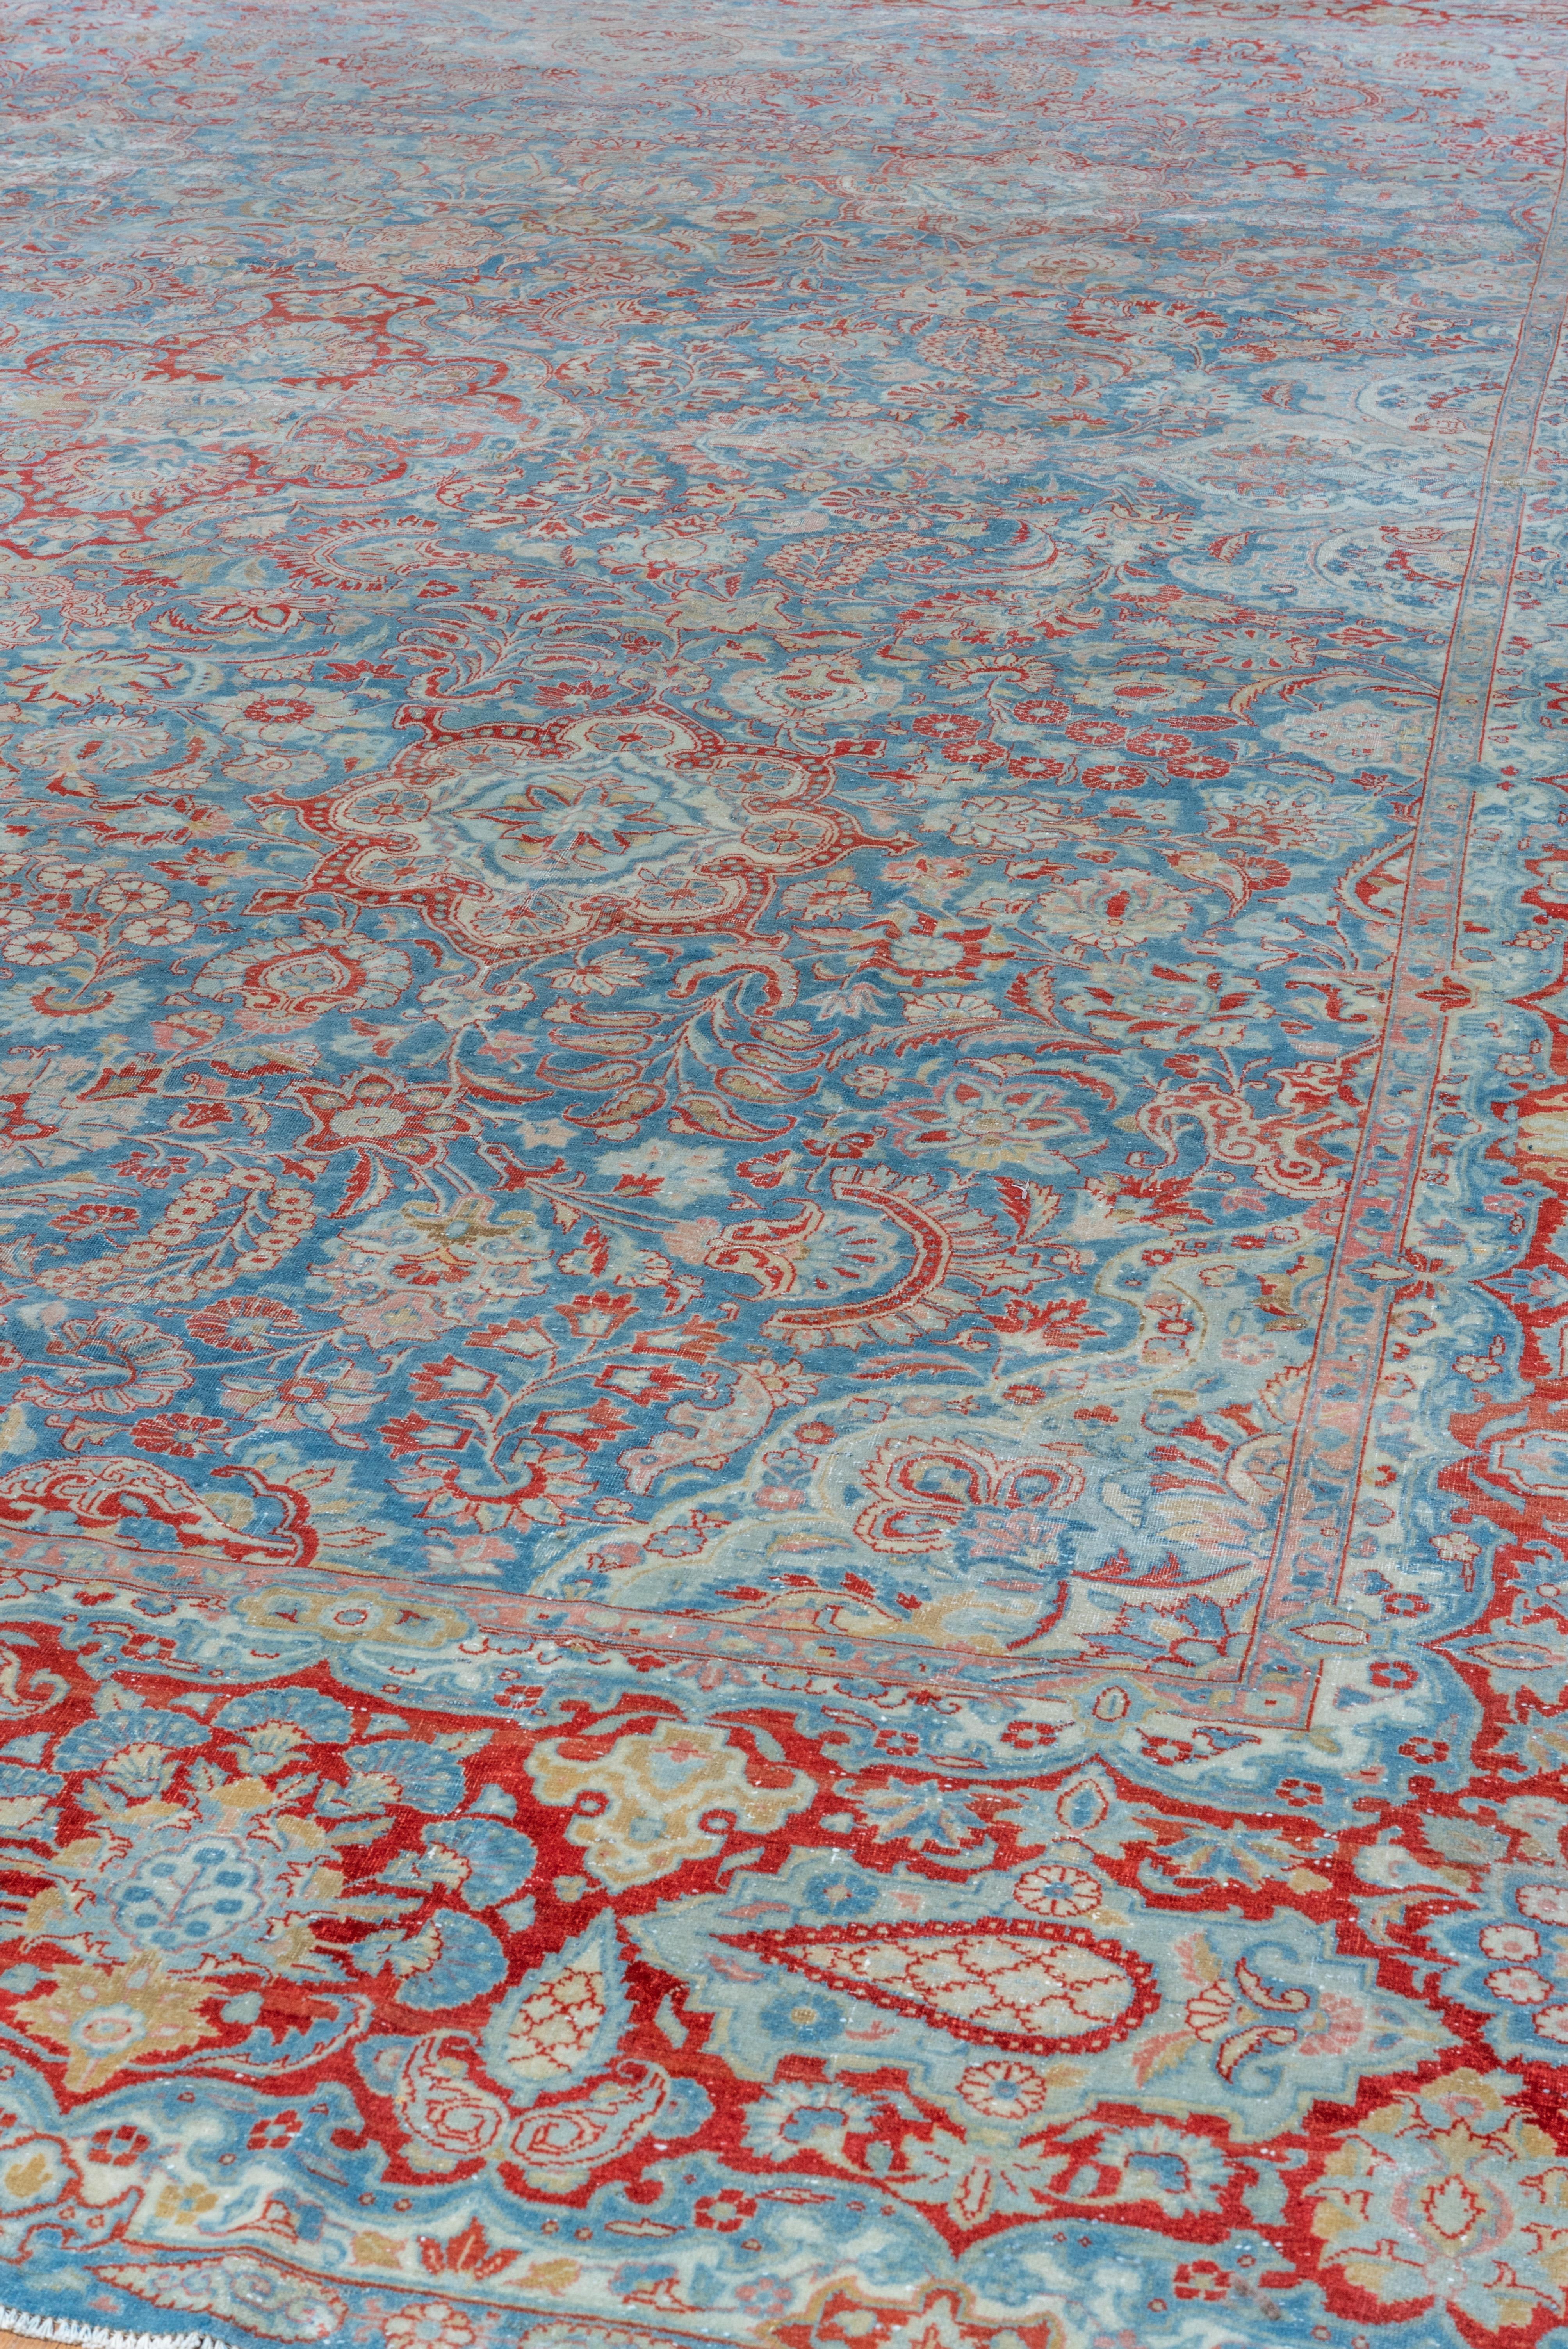 Persian Eliko Rugs by David Ariel Finely Woven Antique Kashan Carpet with Reds and Blues For Sale